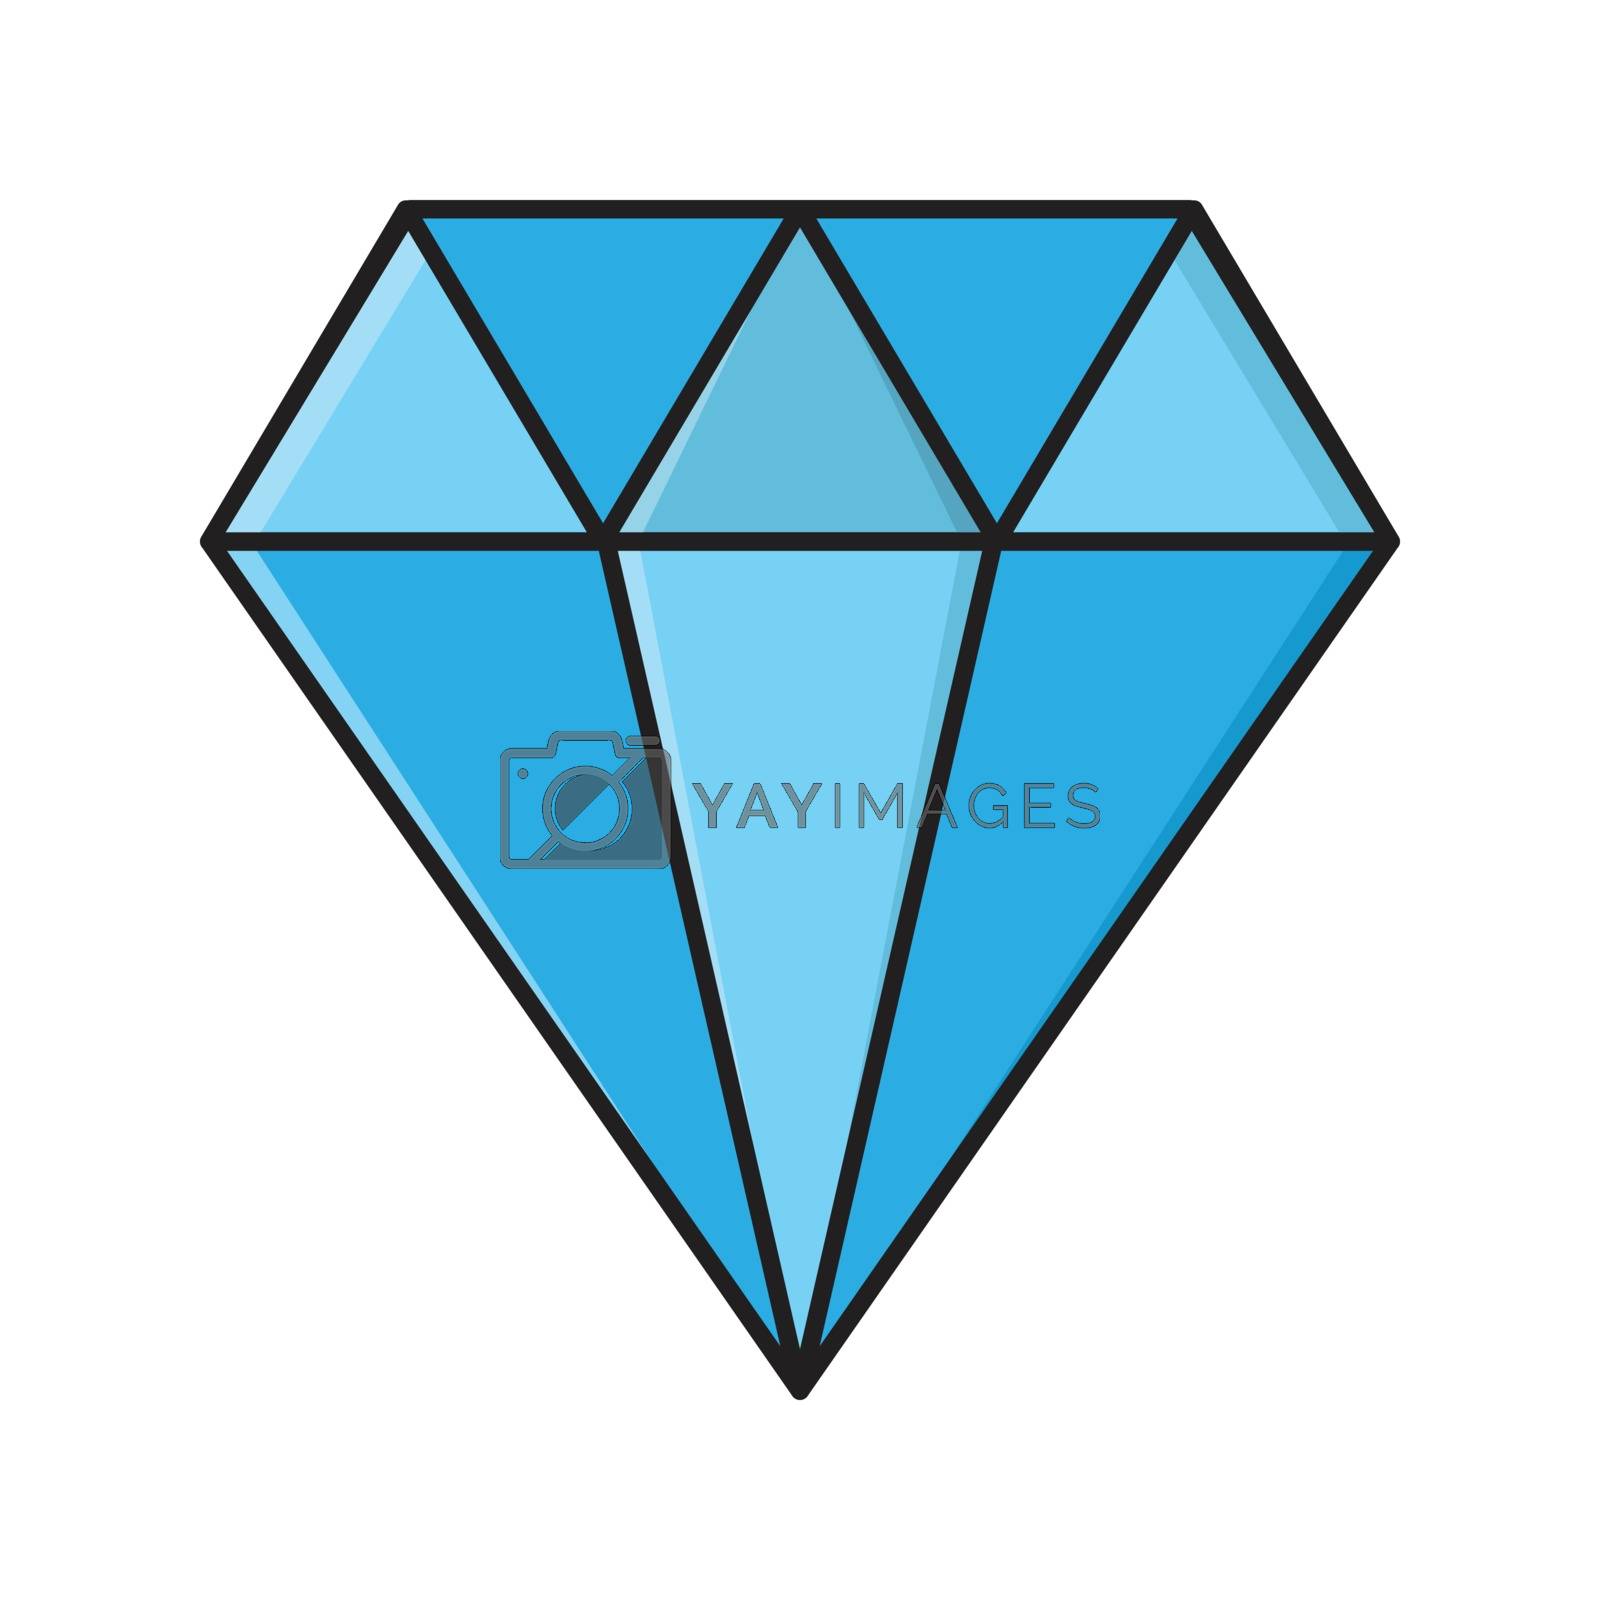 Royalty free image of gem  by vectorstall